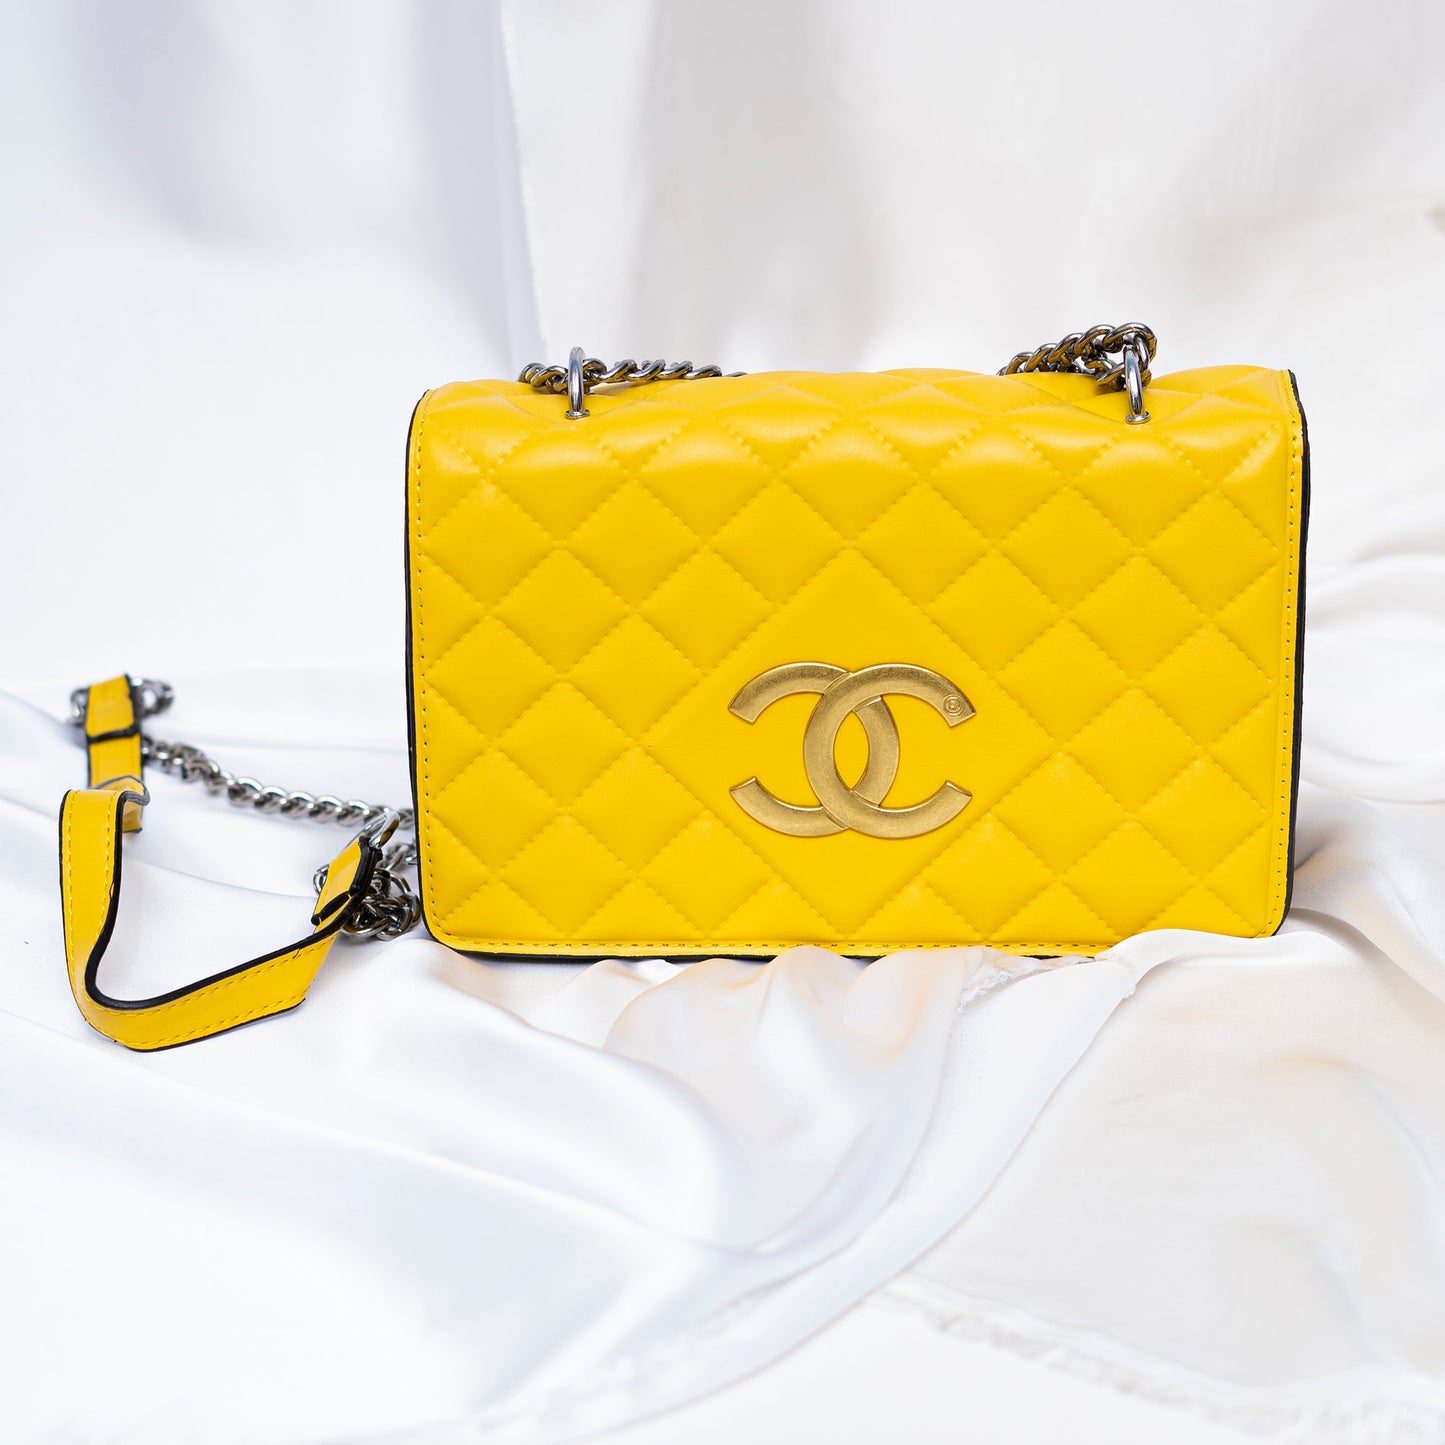 Chanel CC Plaque Wallet-on-Chain Bag